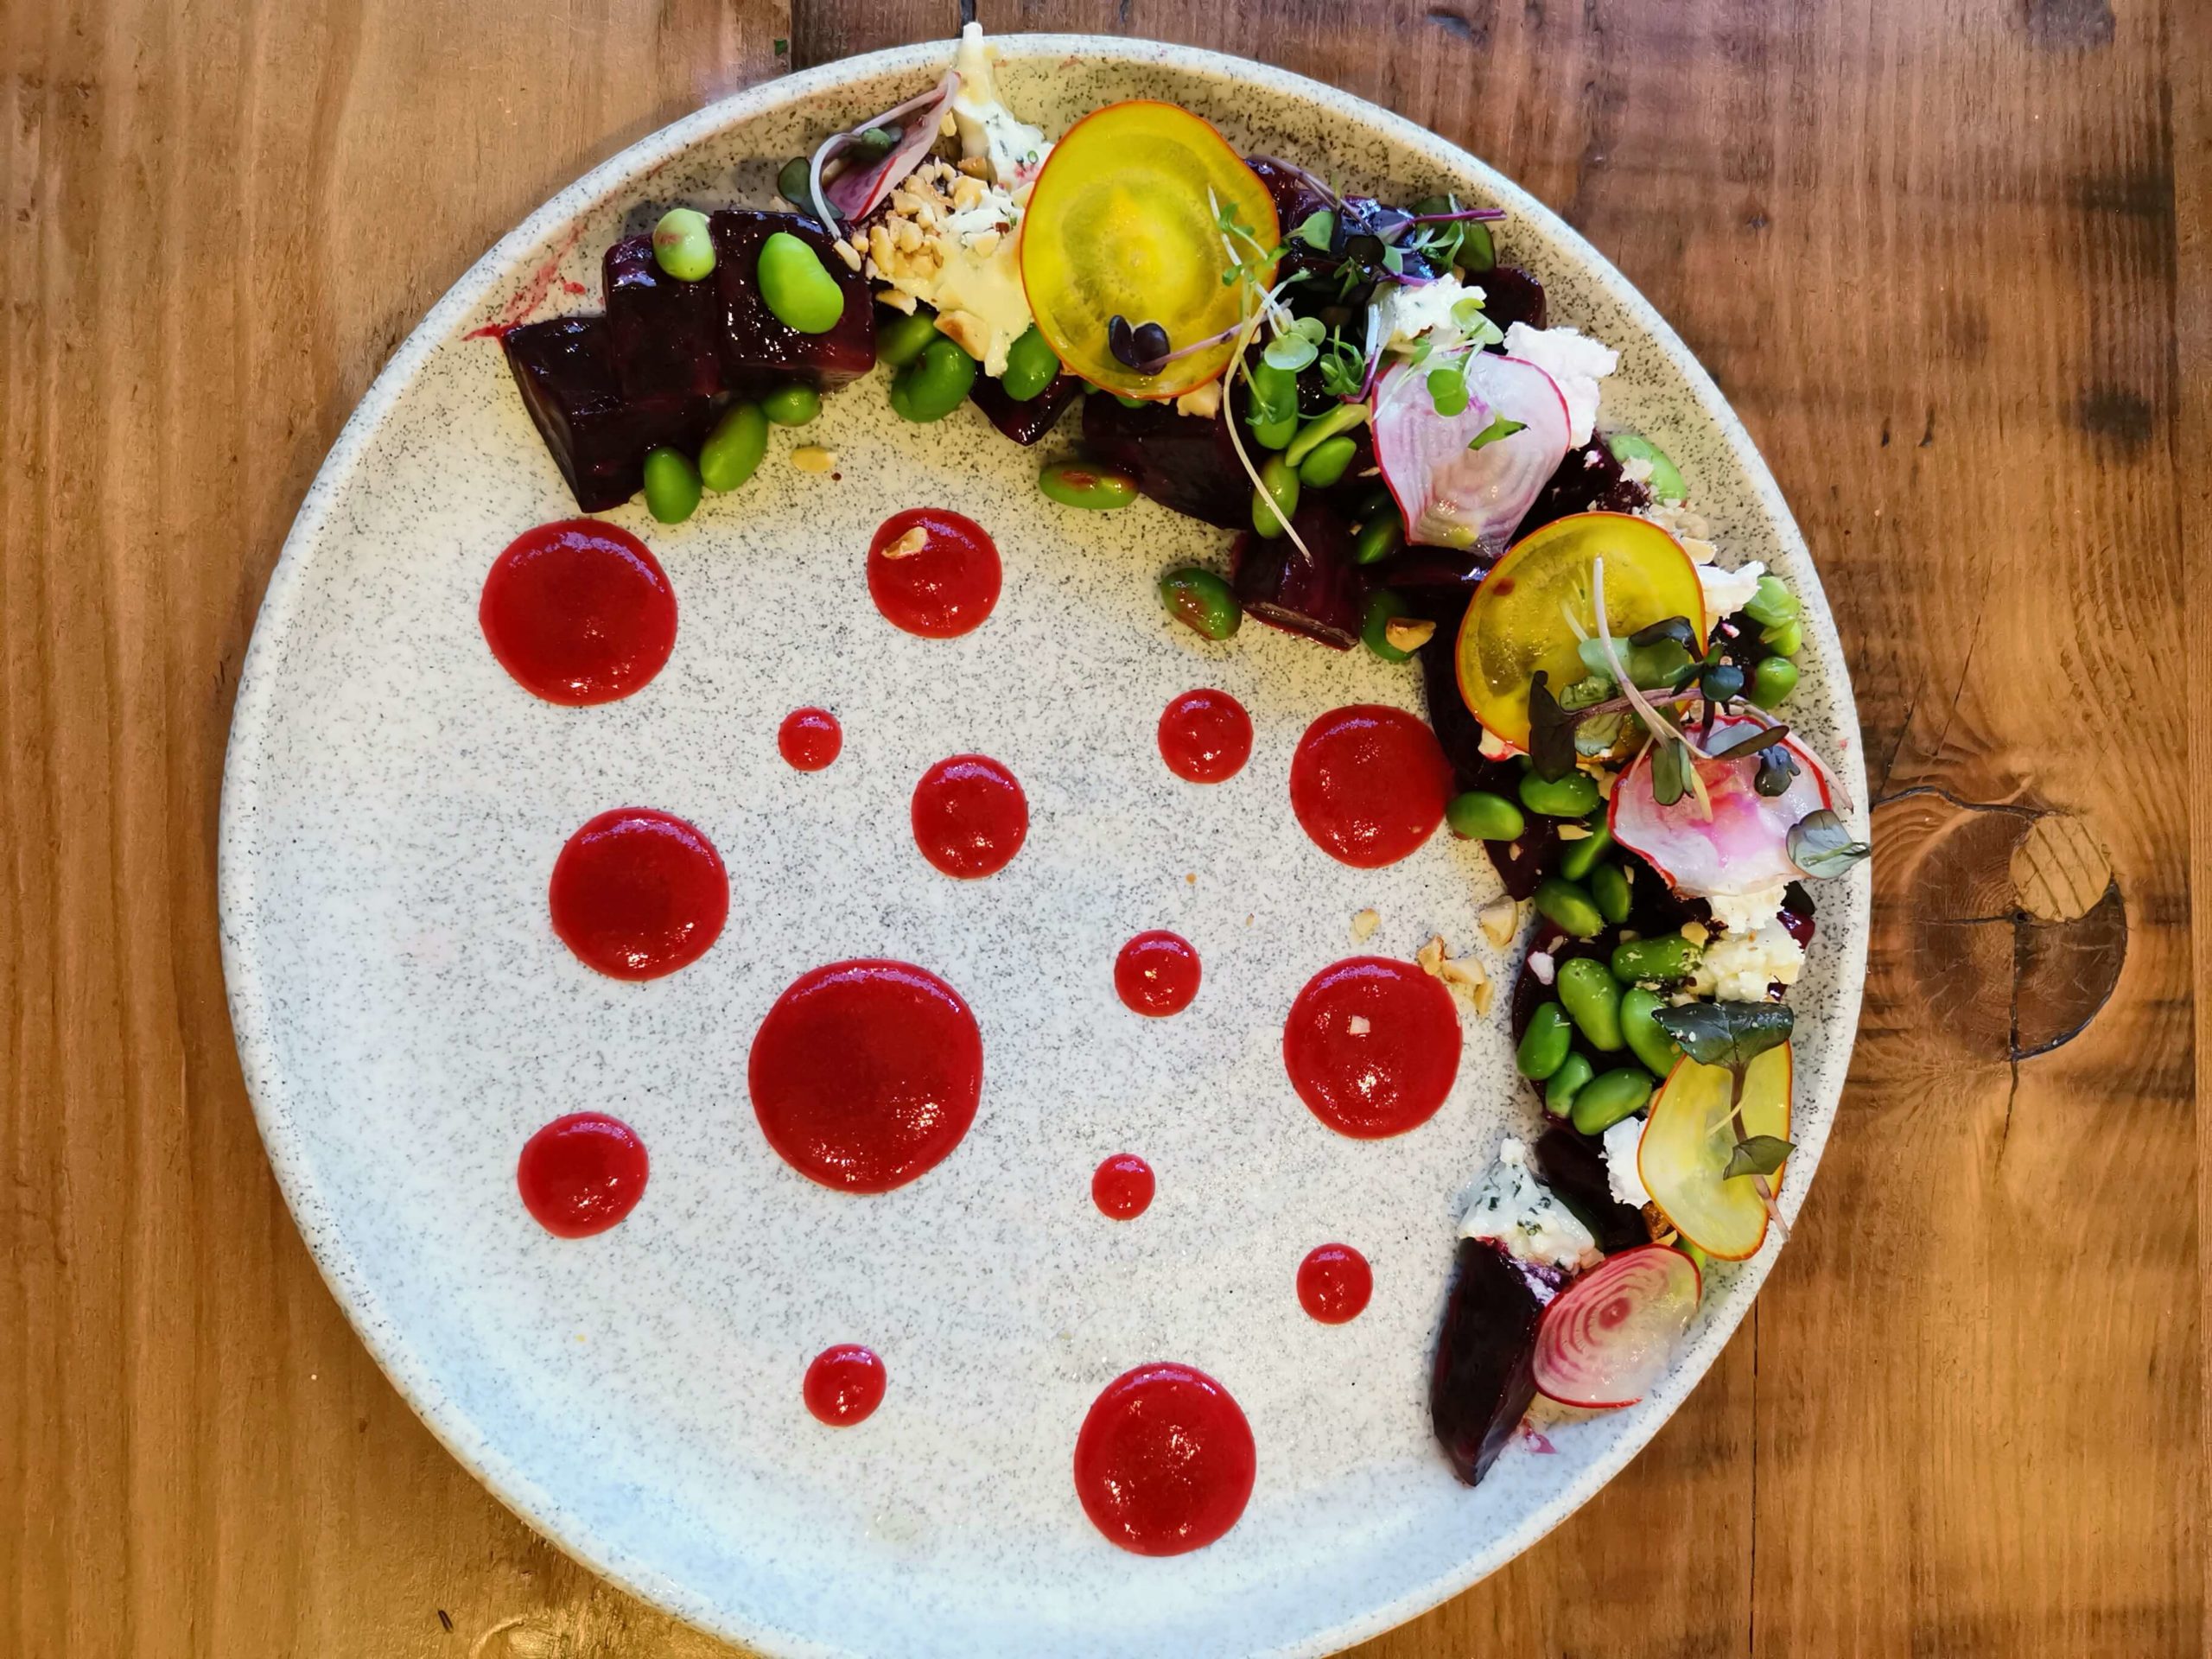 Auckland plant based eatery's beetroot three ways dish with coconut feta and edamame